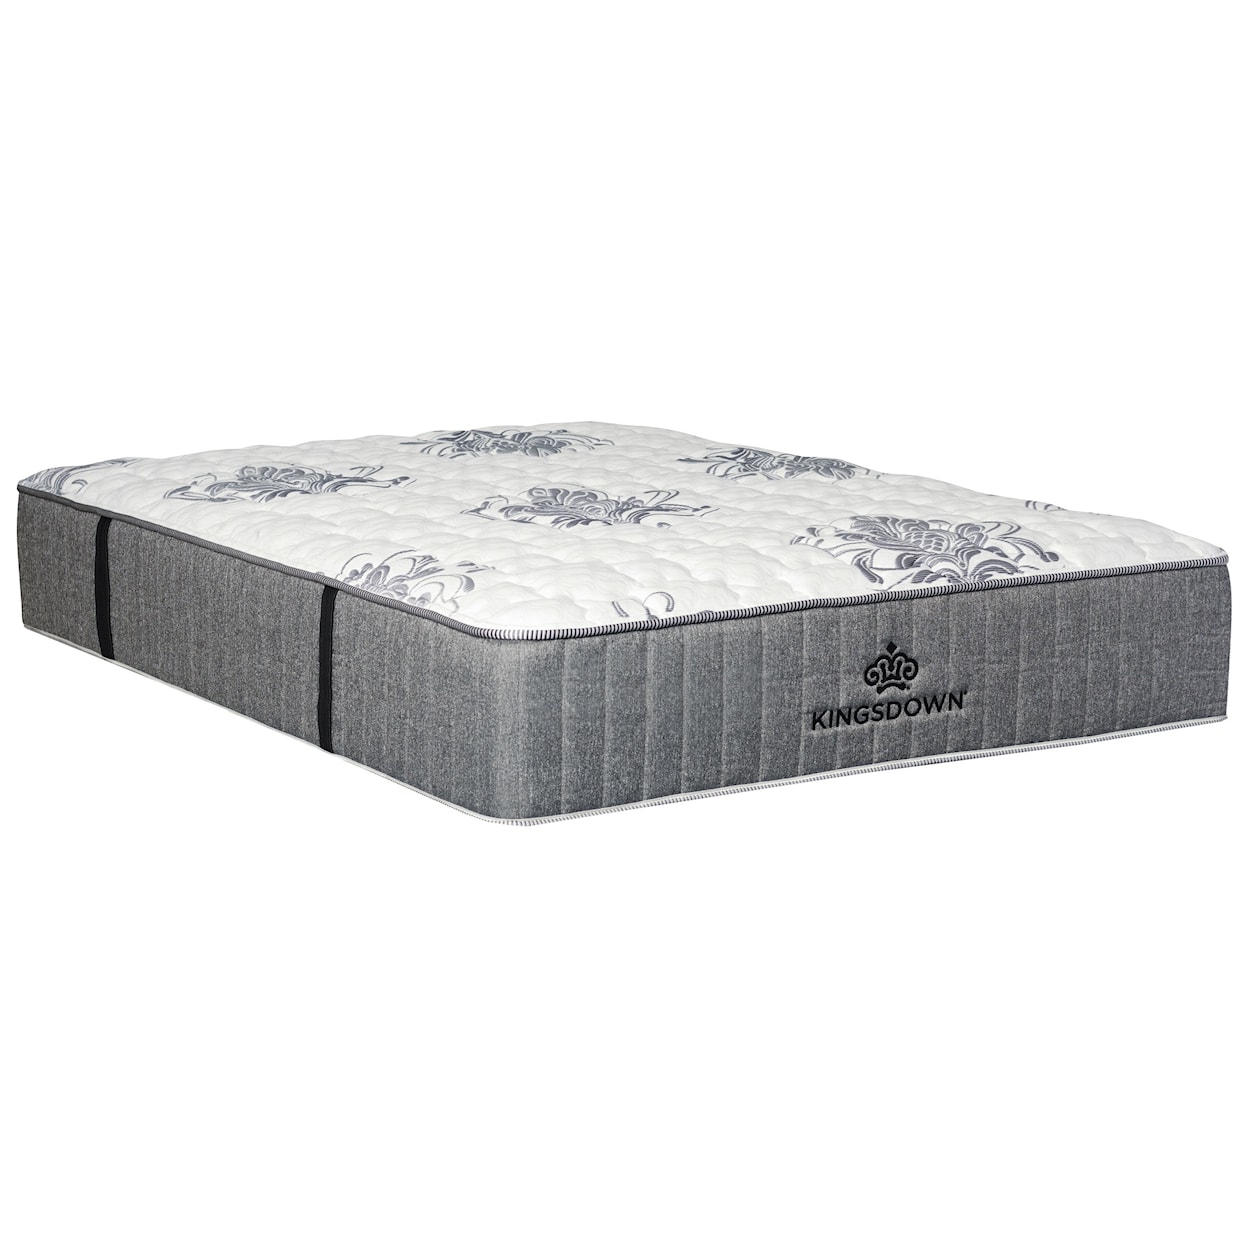 Kingsdown Passions Zest Extra Firm King 14" Extra Firm Mattress